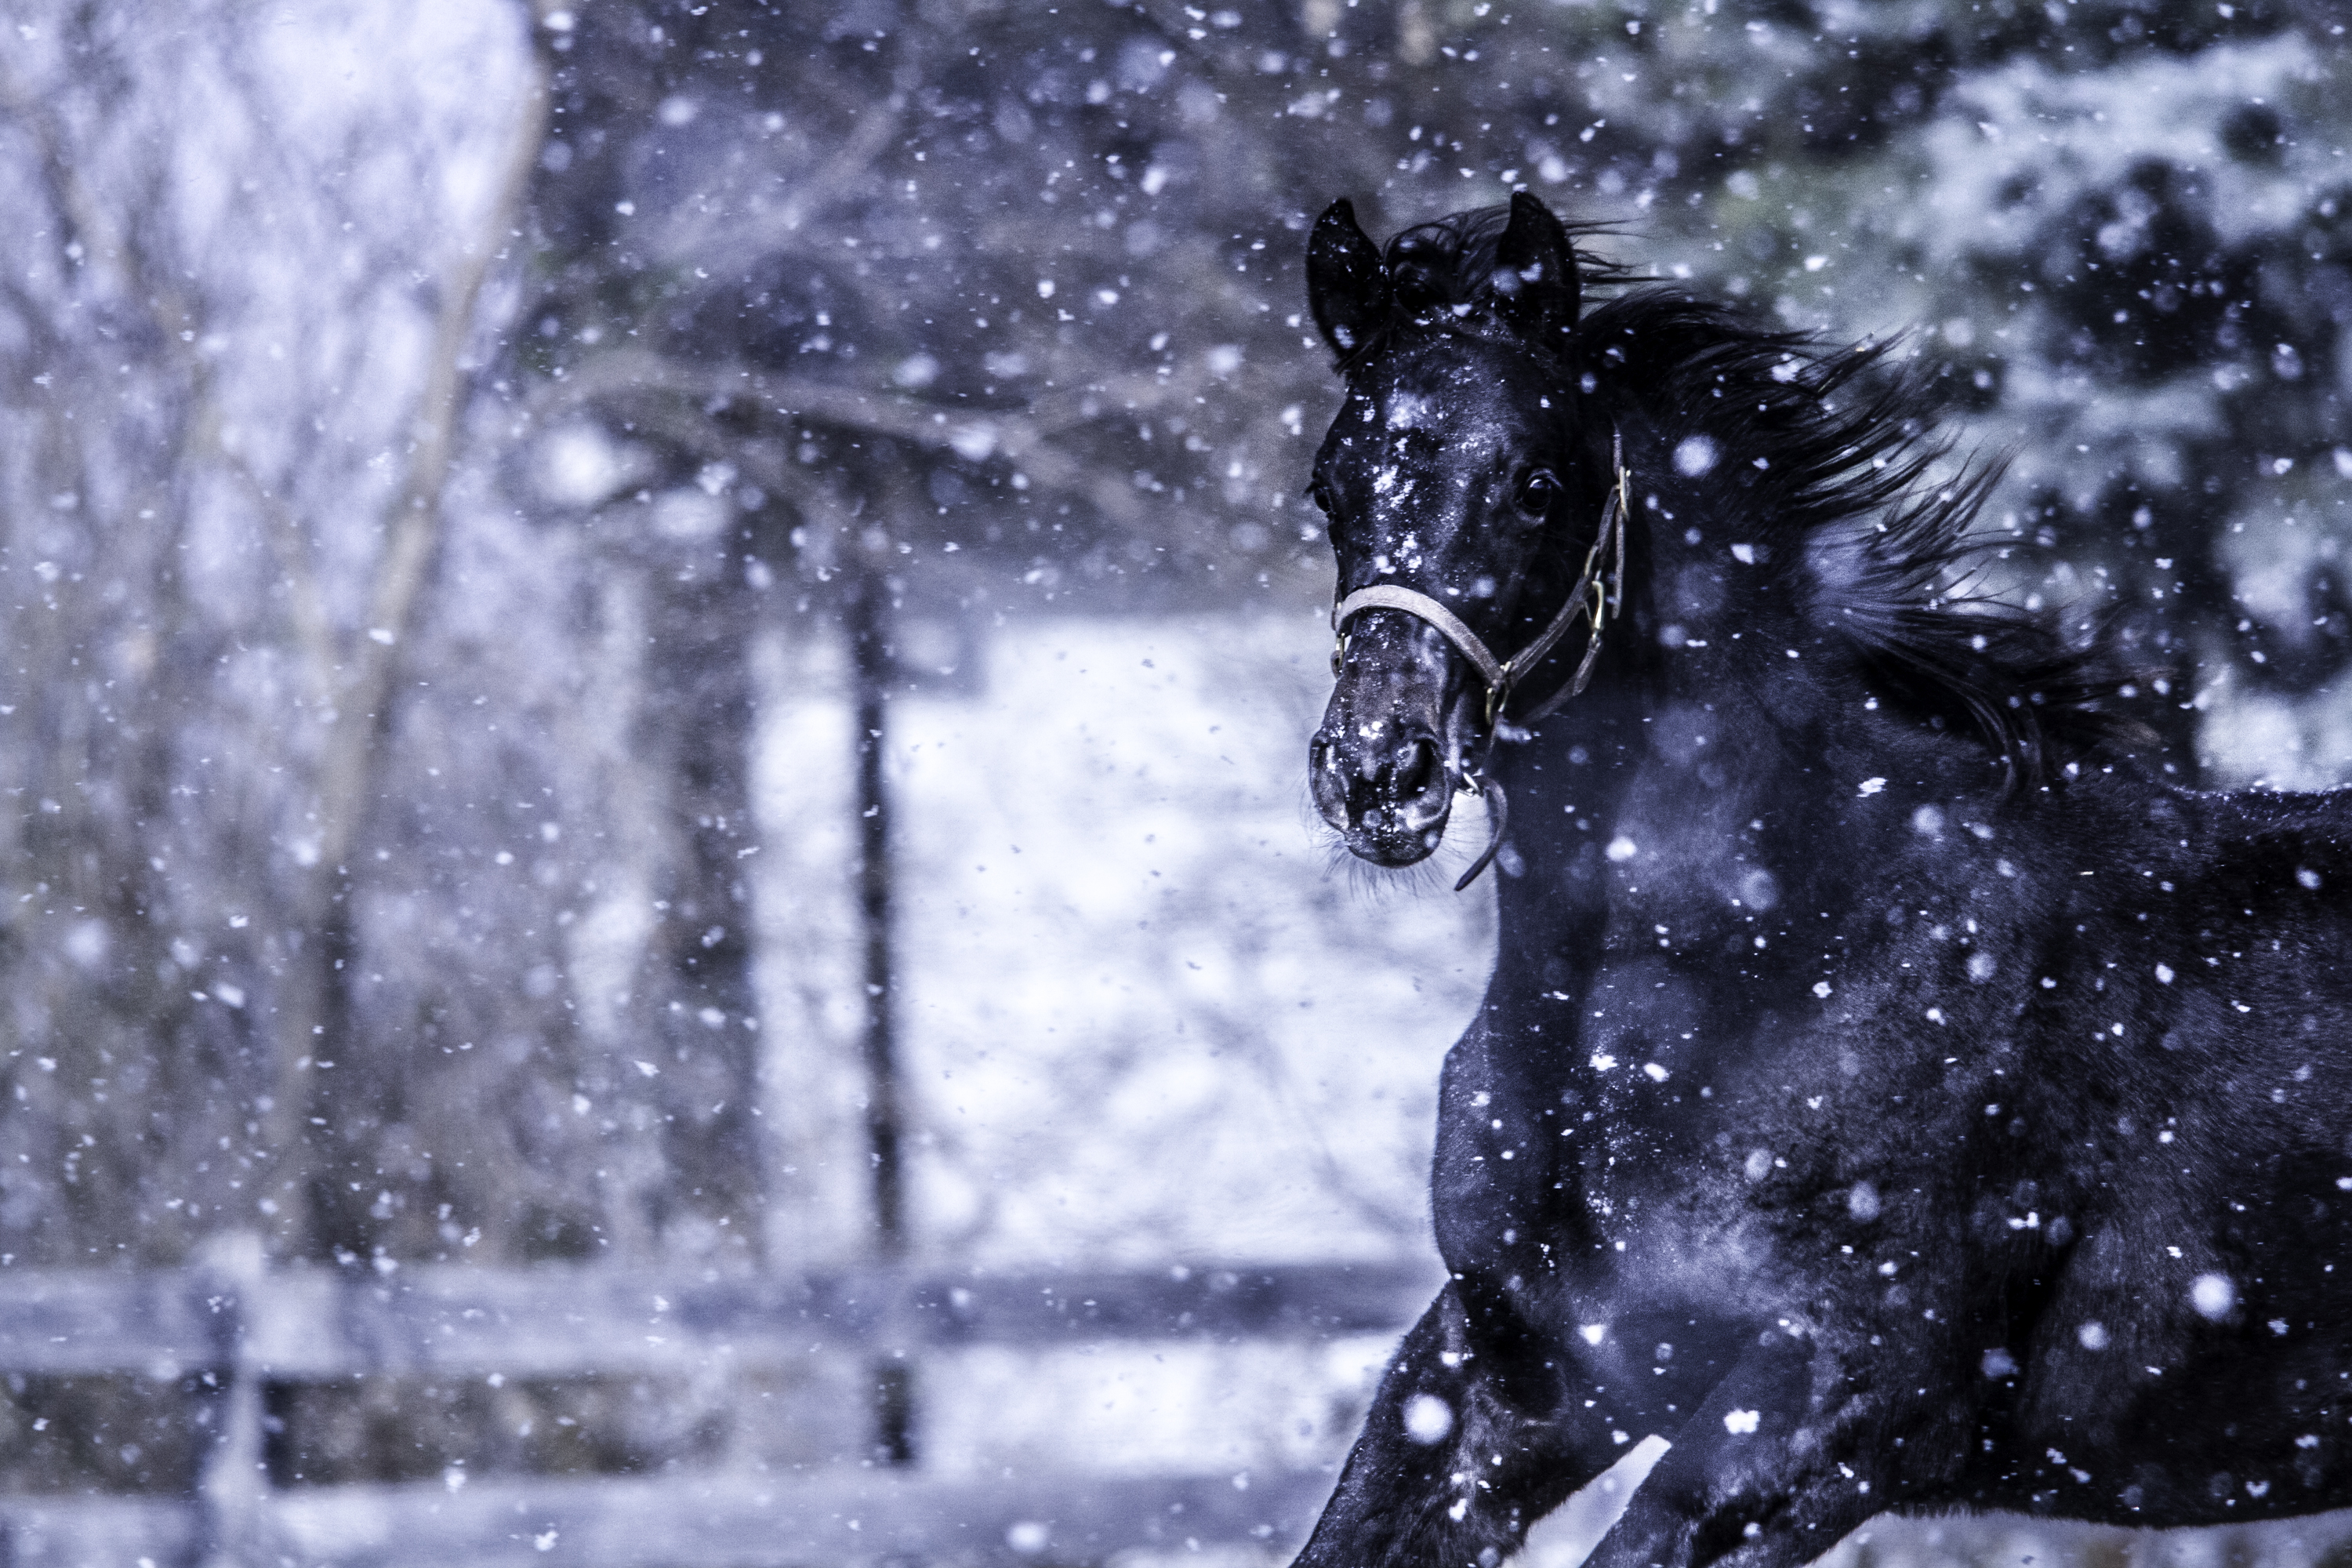 Finalist Photo Titled Foal's First Snowfall – Photographer Santino ...